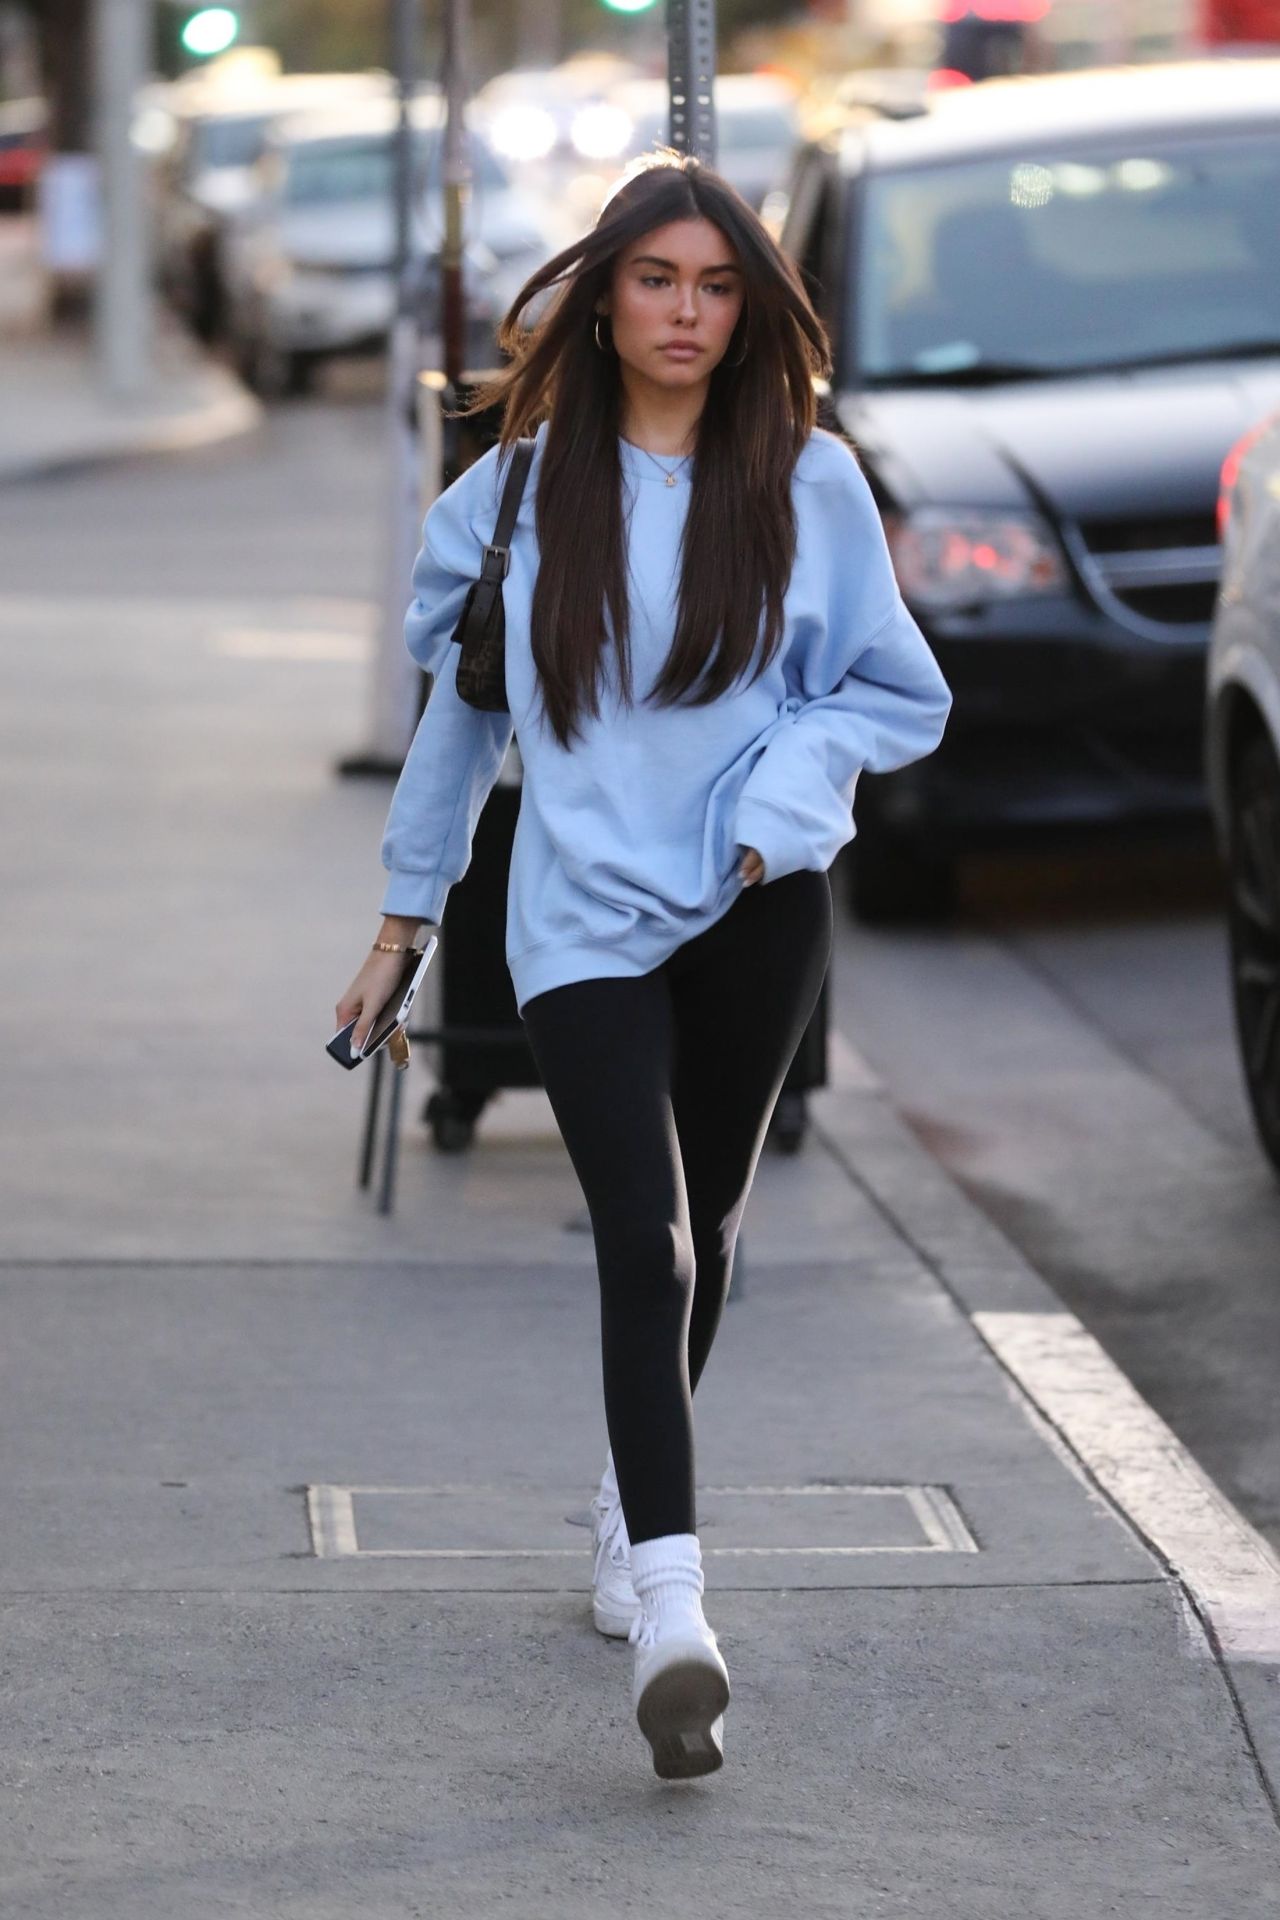 Madison Beer West Hollywood April 22, 2019 – Star Style